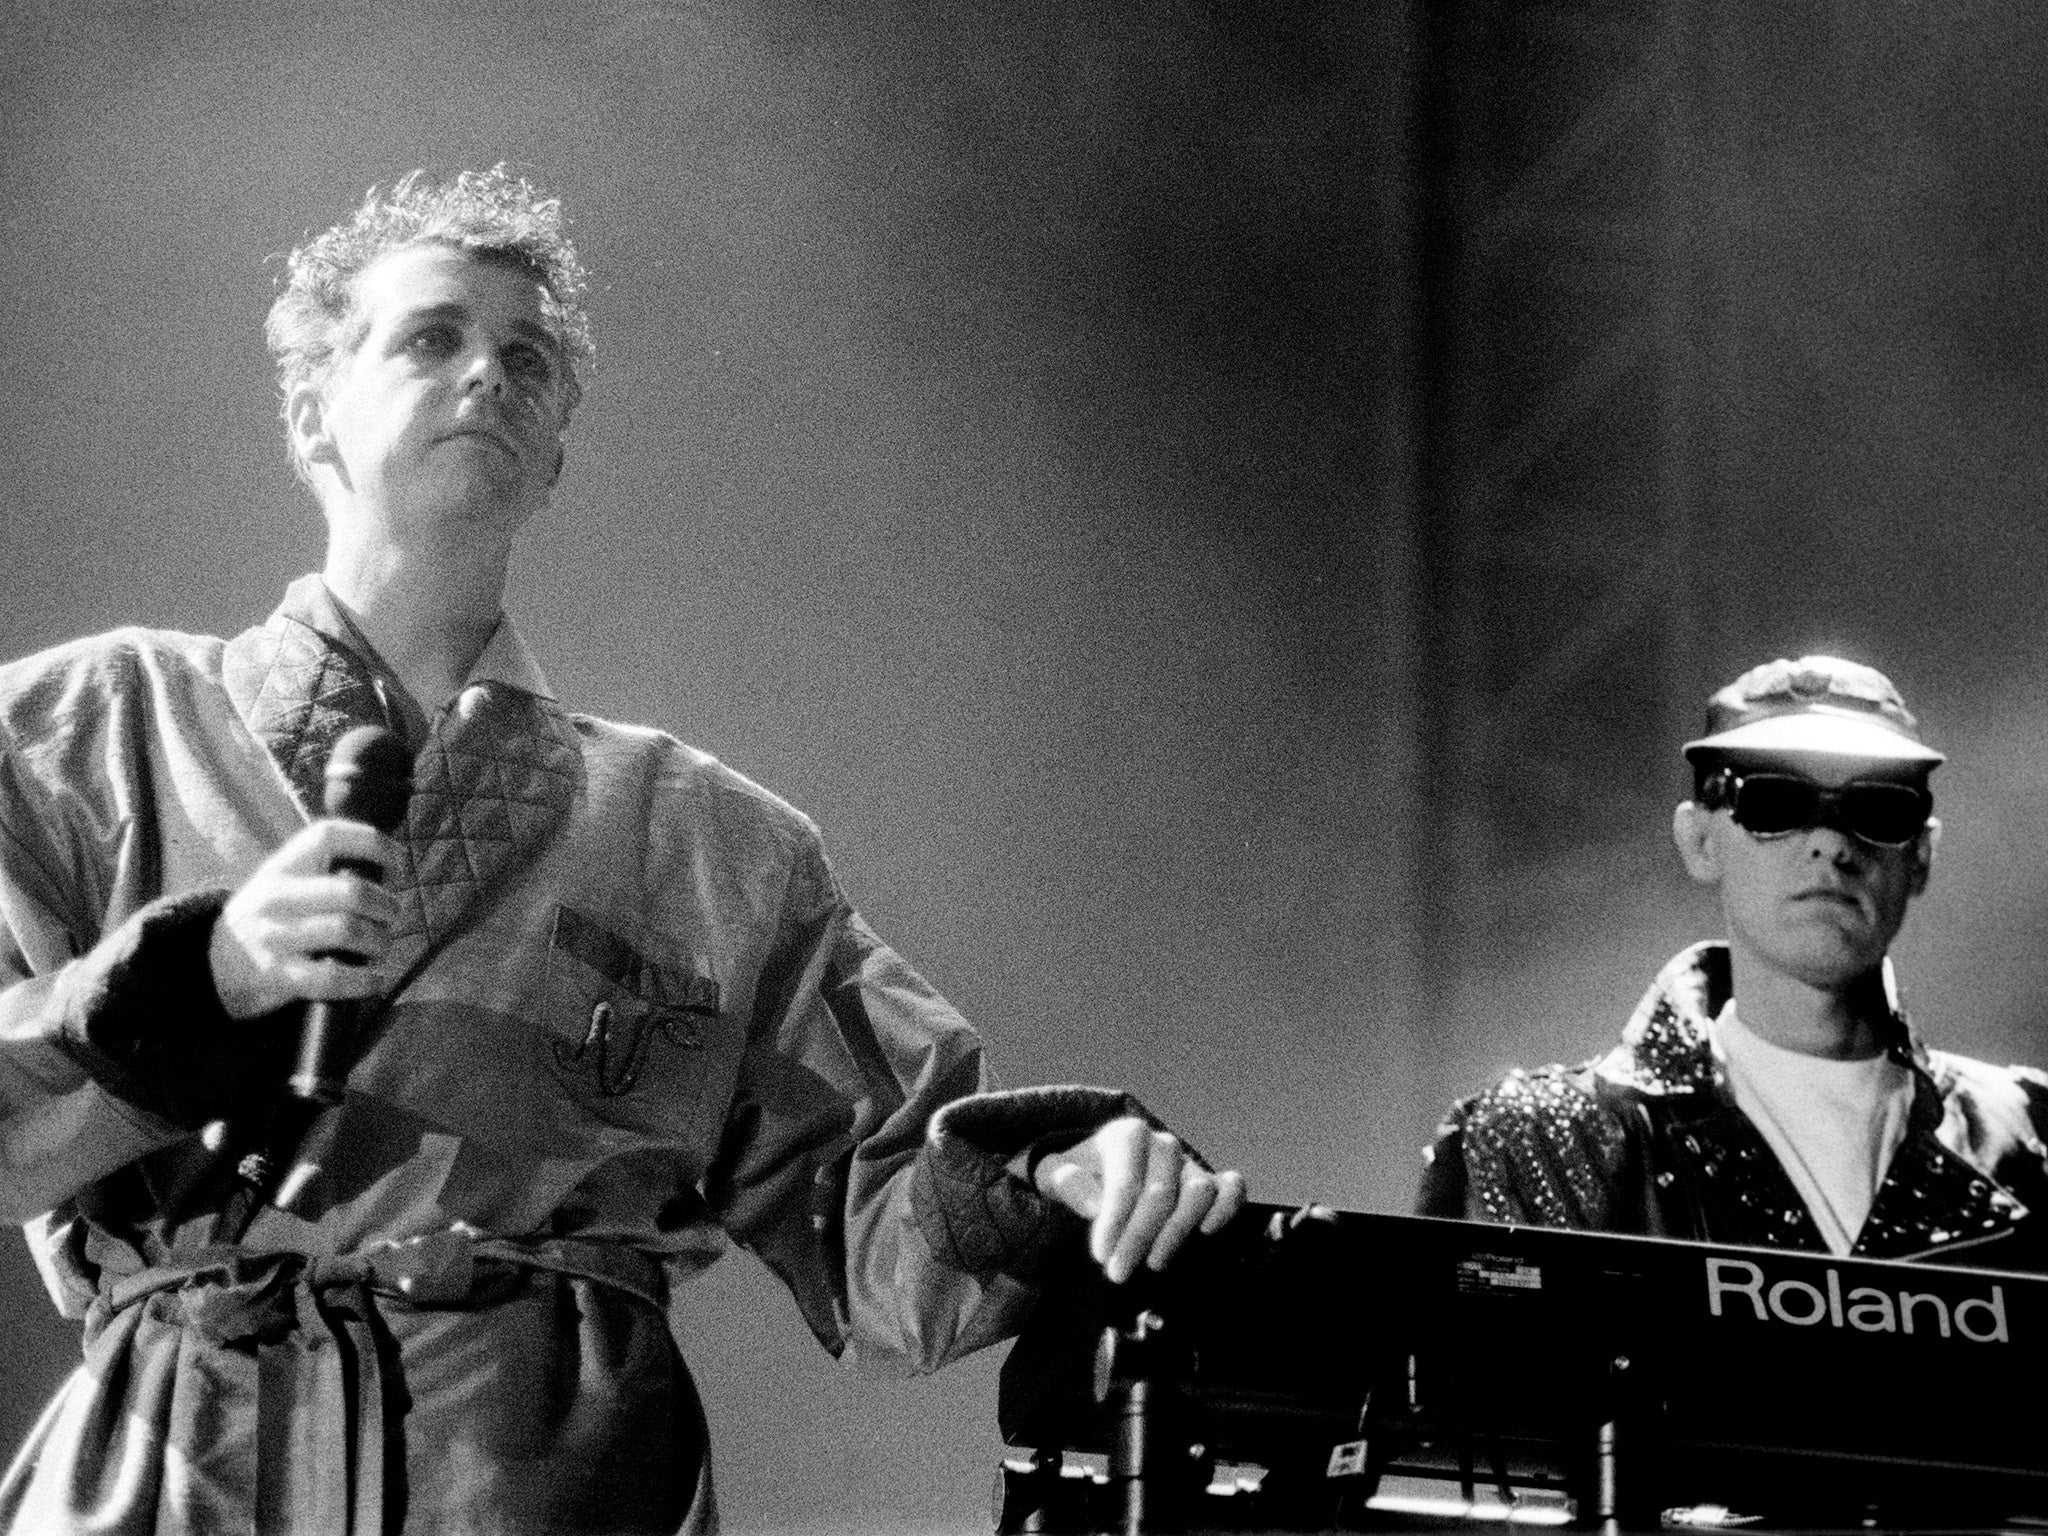 Striking the right chord: Neil Tennant, left, and Chris Lowe